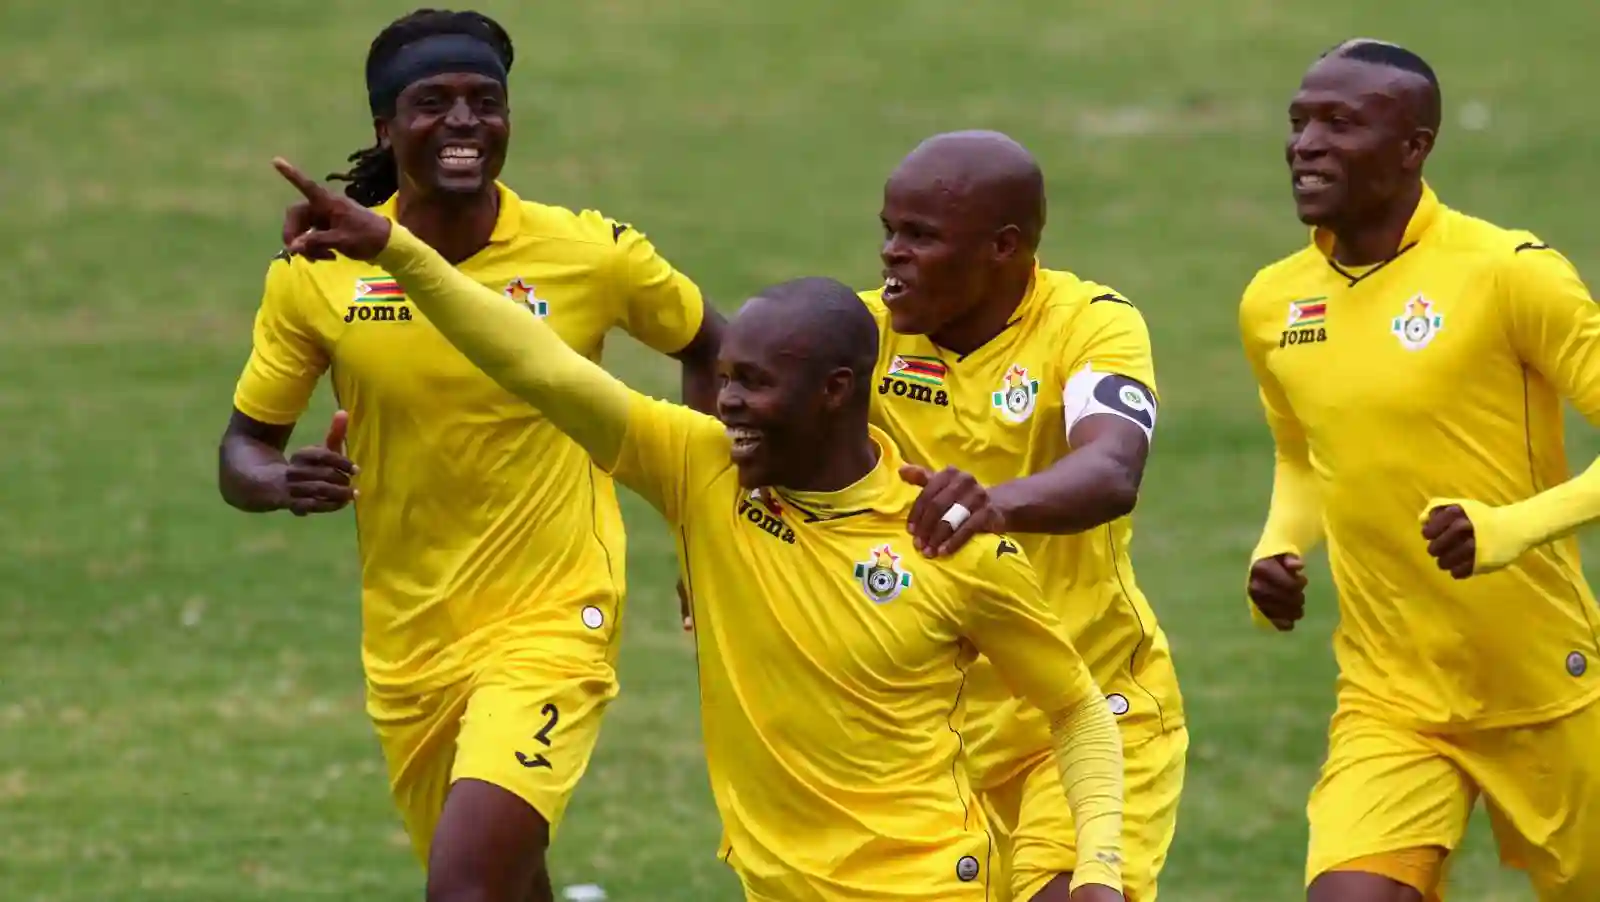 Katsande Yearns For "One Last Time" With The Warriors